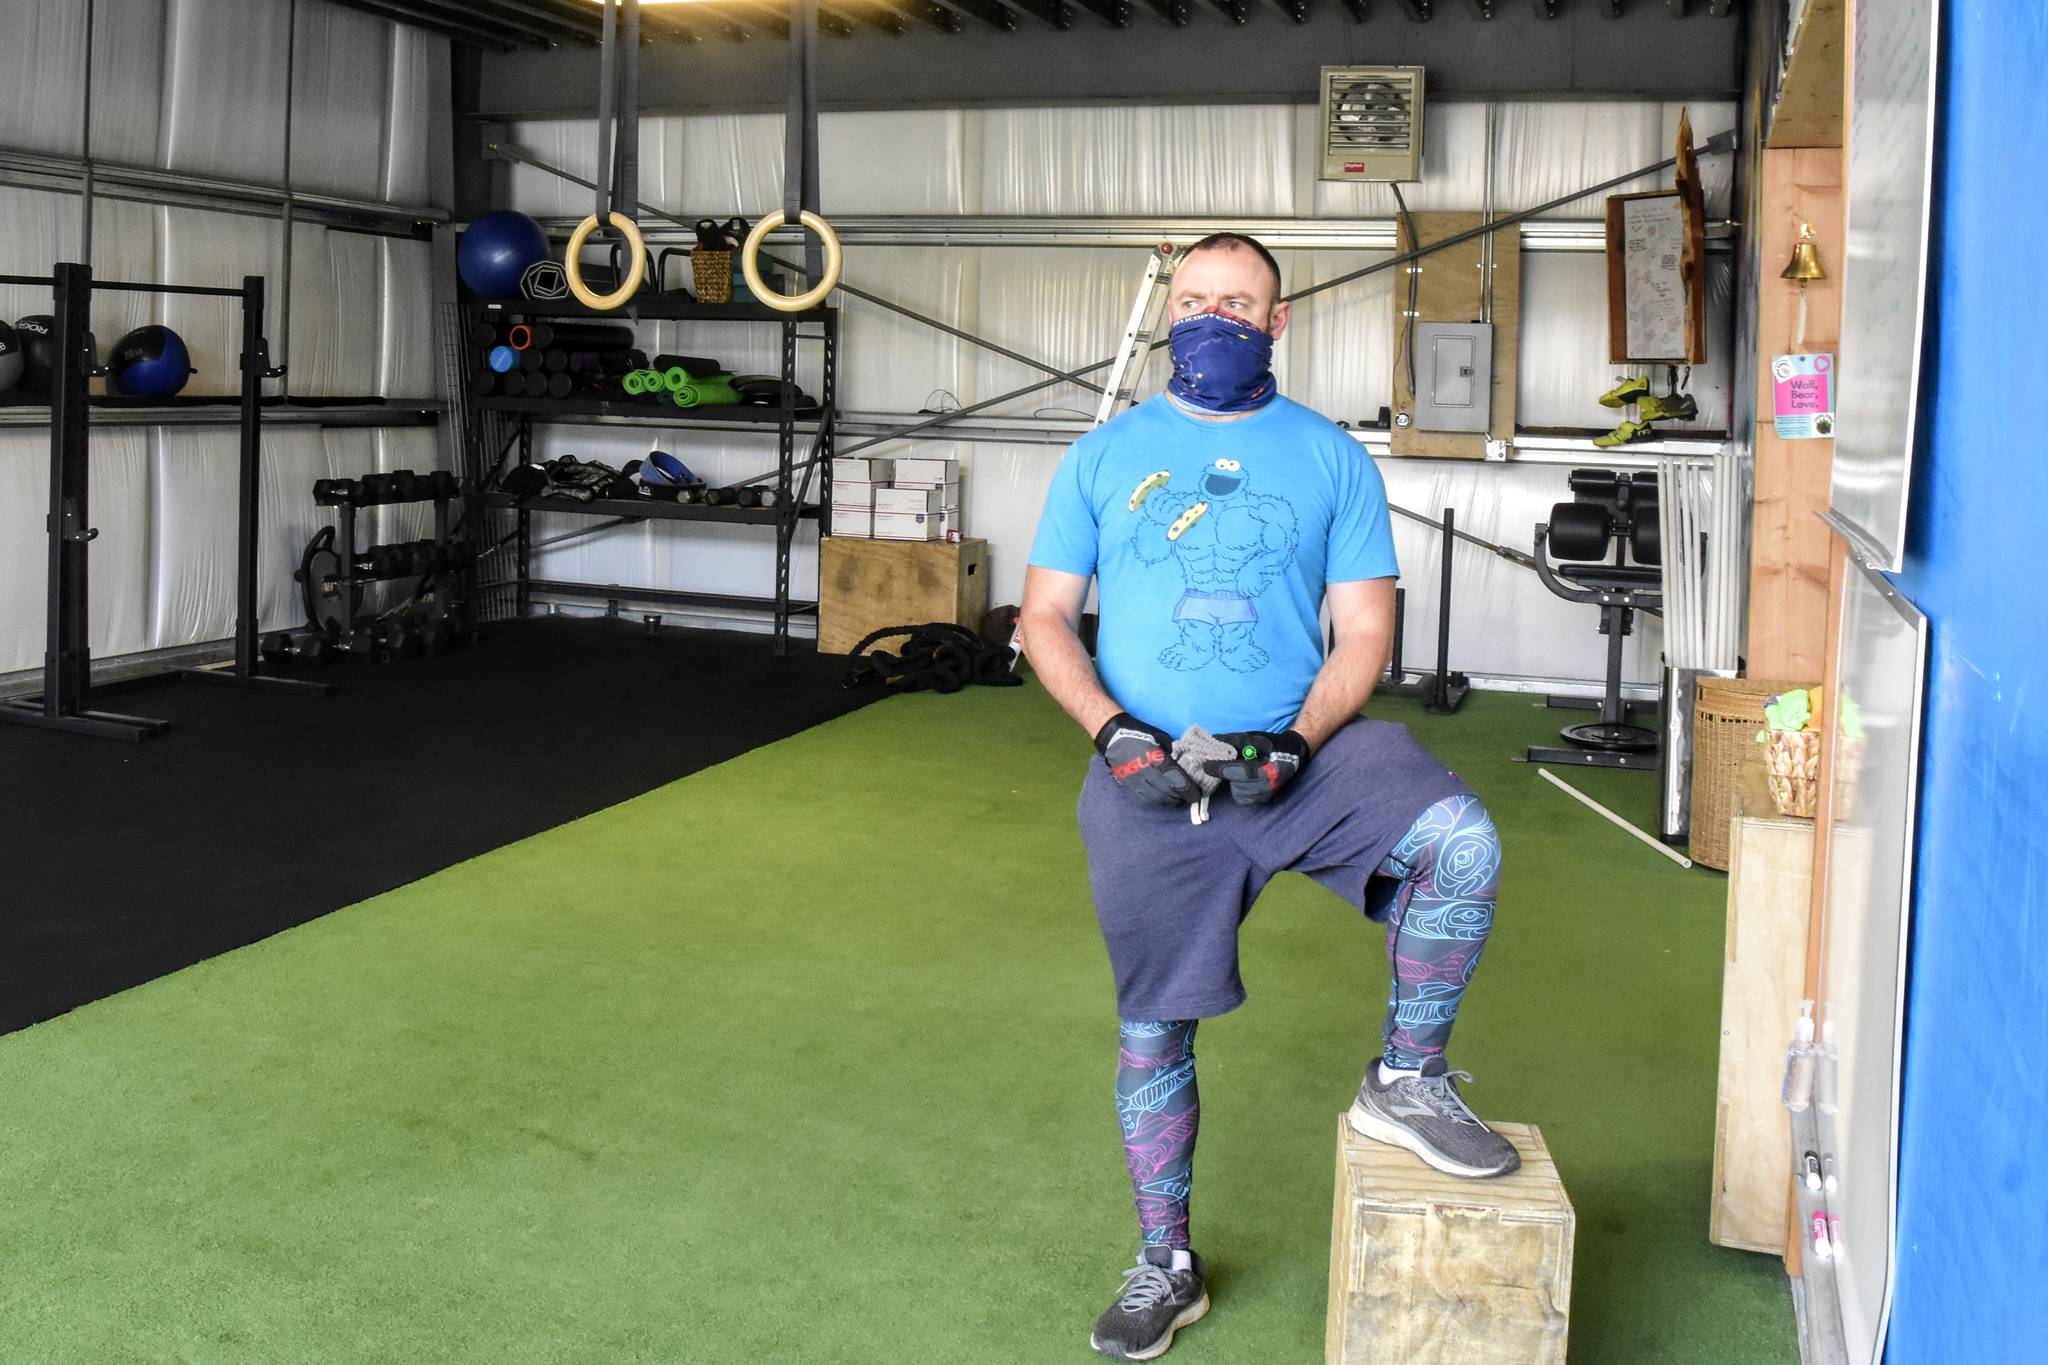 Logan Lott, owner of Tongass Fitness, prepares his gym Friday for its first customers in weeks, a group of four people. Lott said he had trouble finding state guidelines early, and hopes for additional clarification from the state on some of them.(Peter Segall | Juneau Empire)